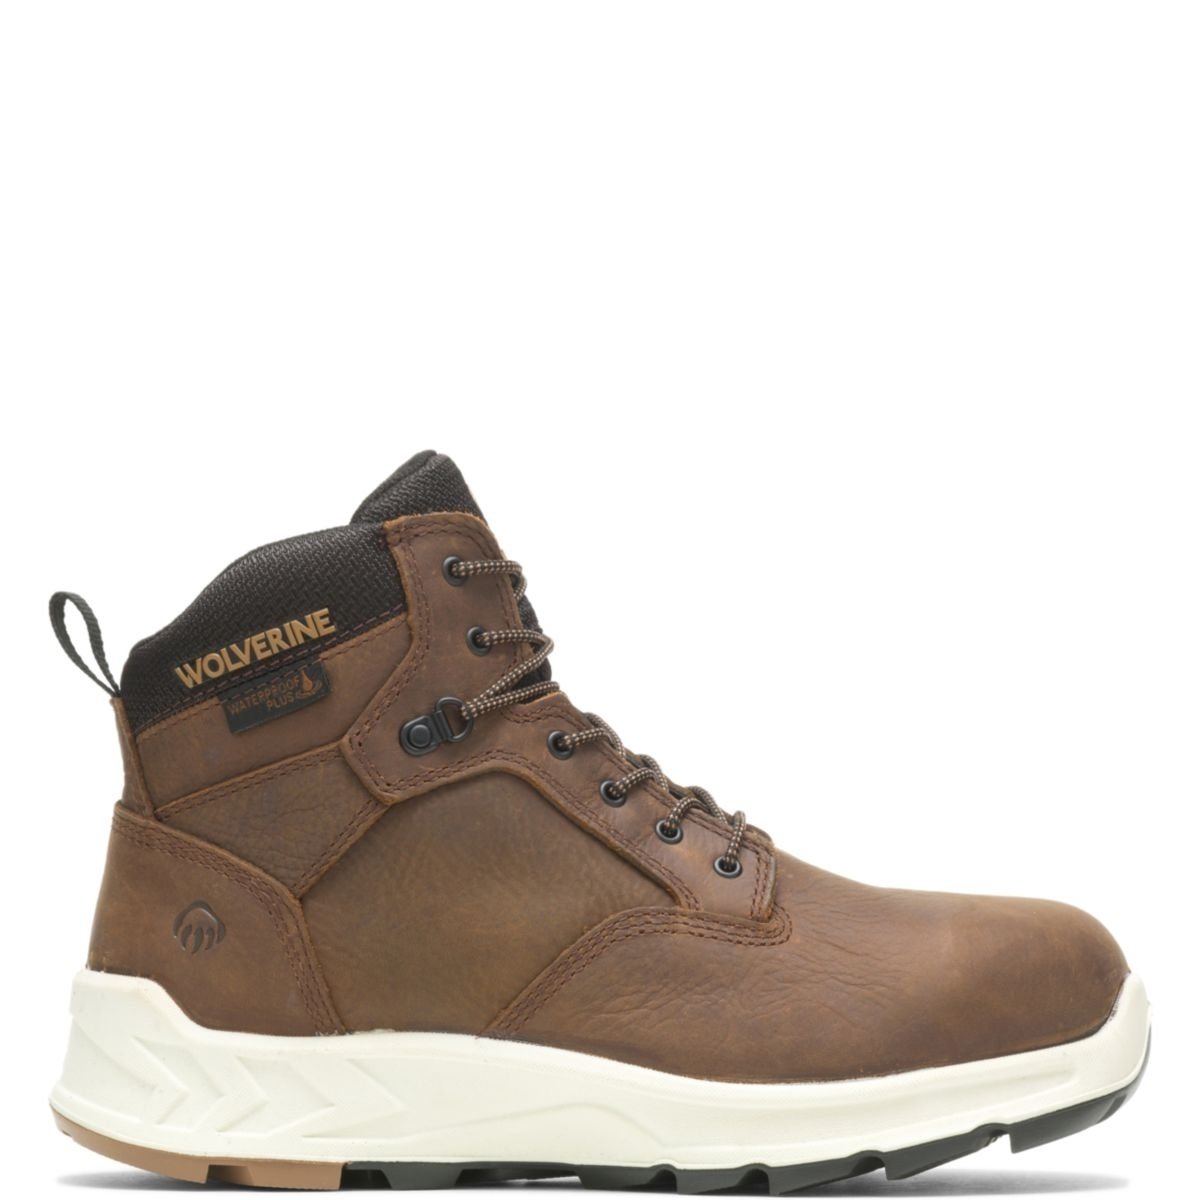 WOLVERINE Men's ShiftPlus Work LX 6 Alloy Toe Work Boot Brown - W201156 BROWN - BROWN, 7-M